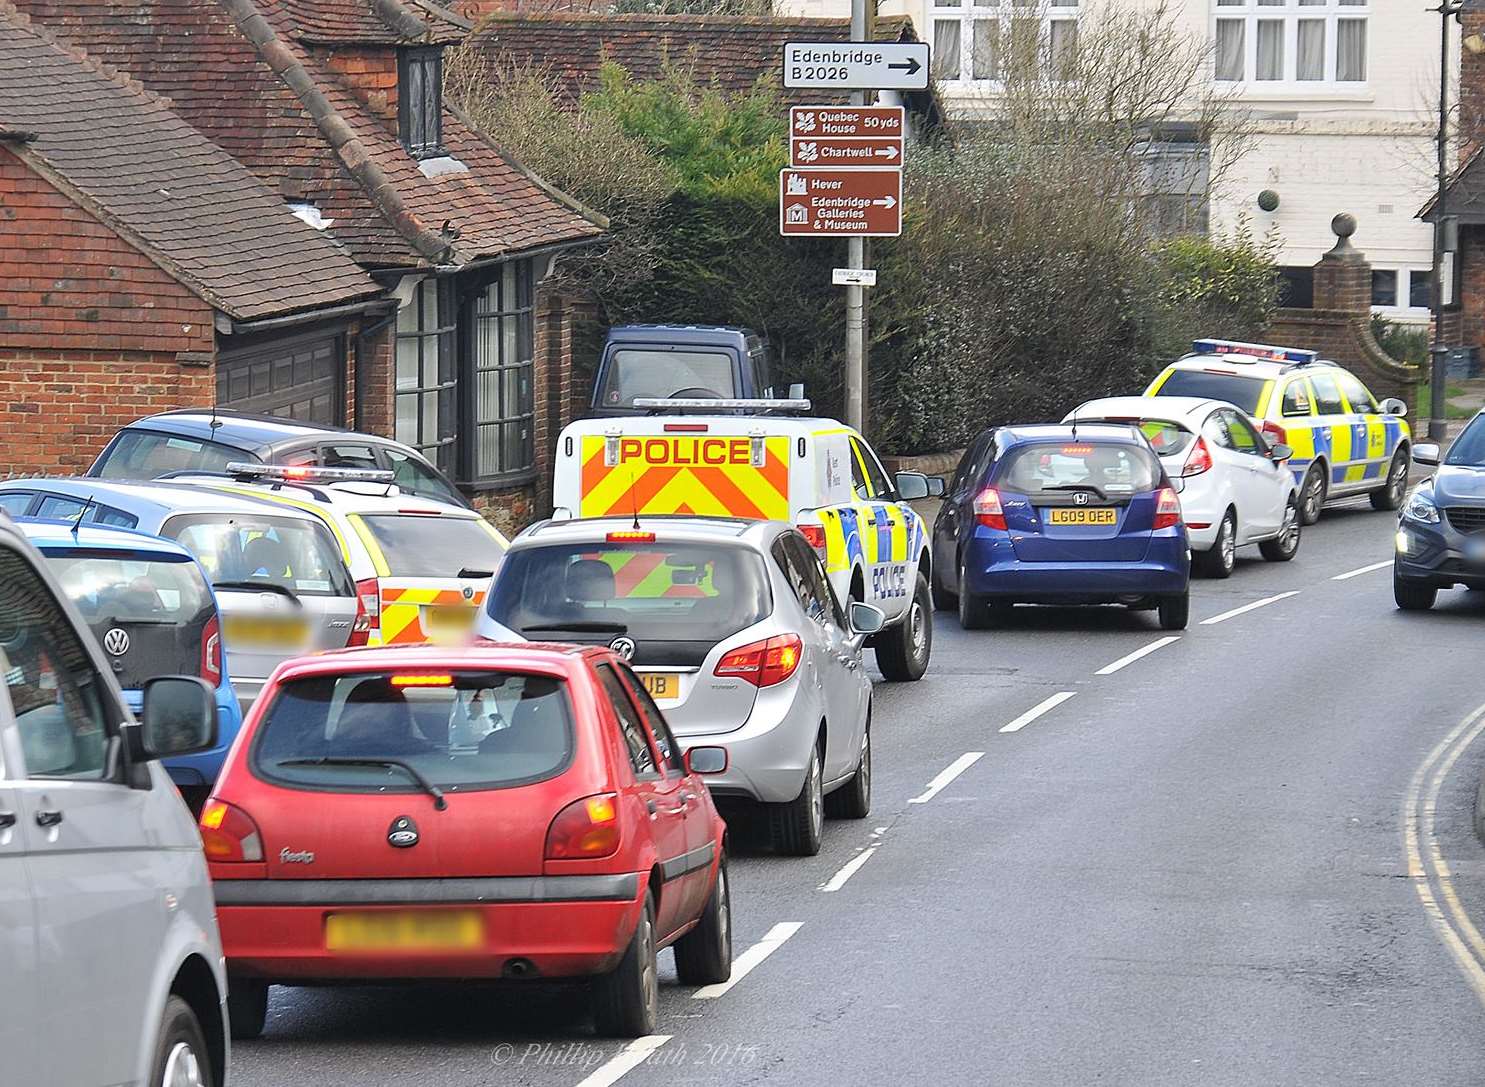 The road was closed while emergency services dealt with the incident. Picture: Philip Hoath